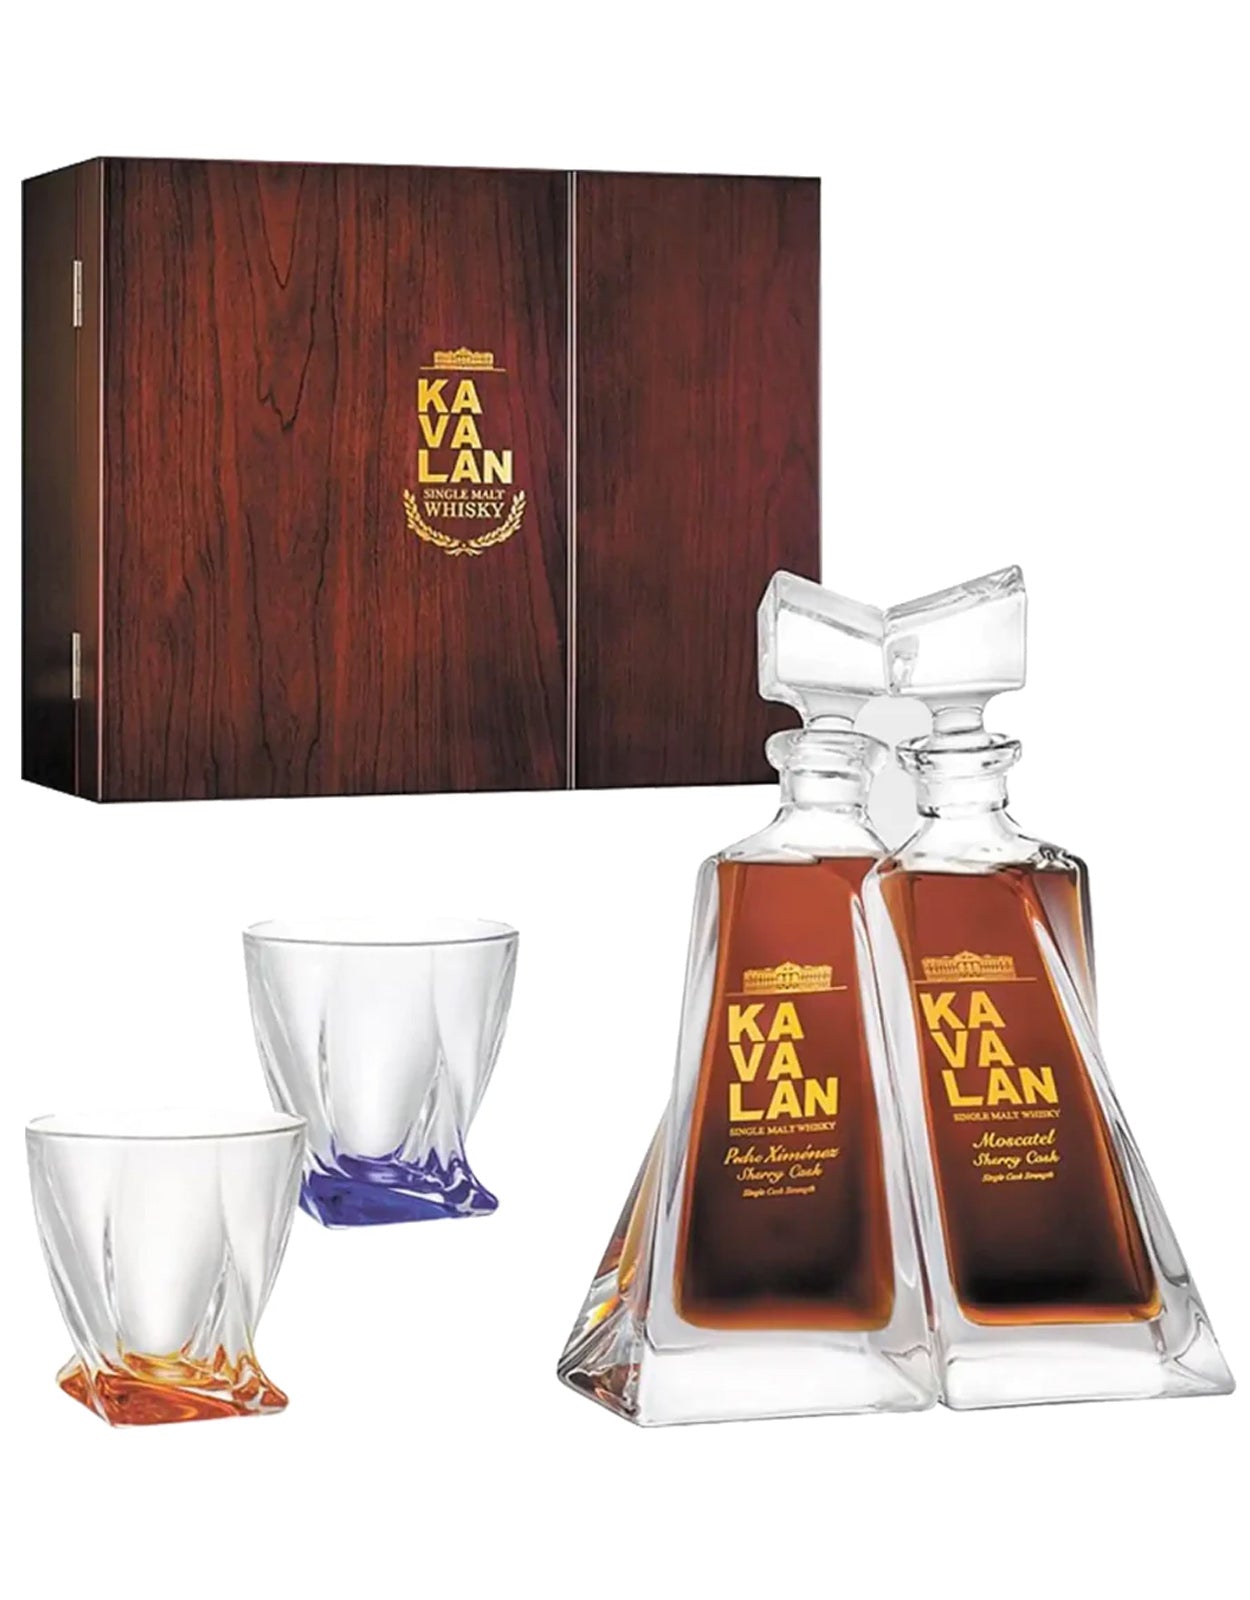 Kavalan Solist PX Sherry And Moscatel Decanter Set - 2 x 500ml Bottles